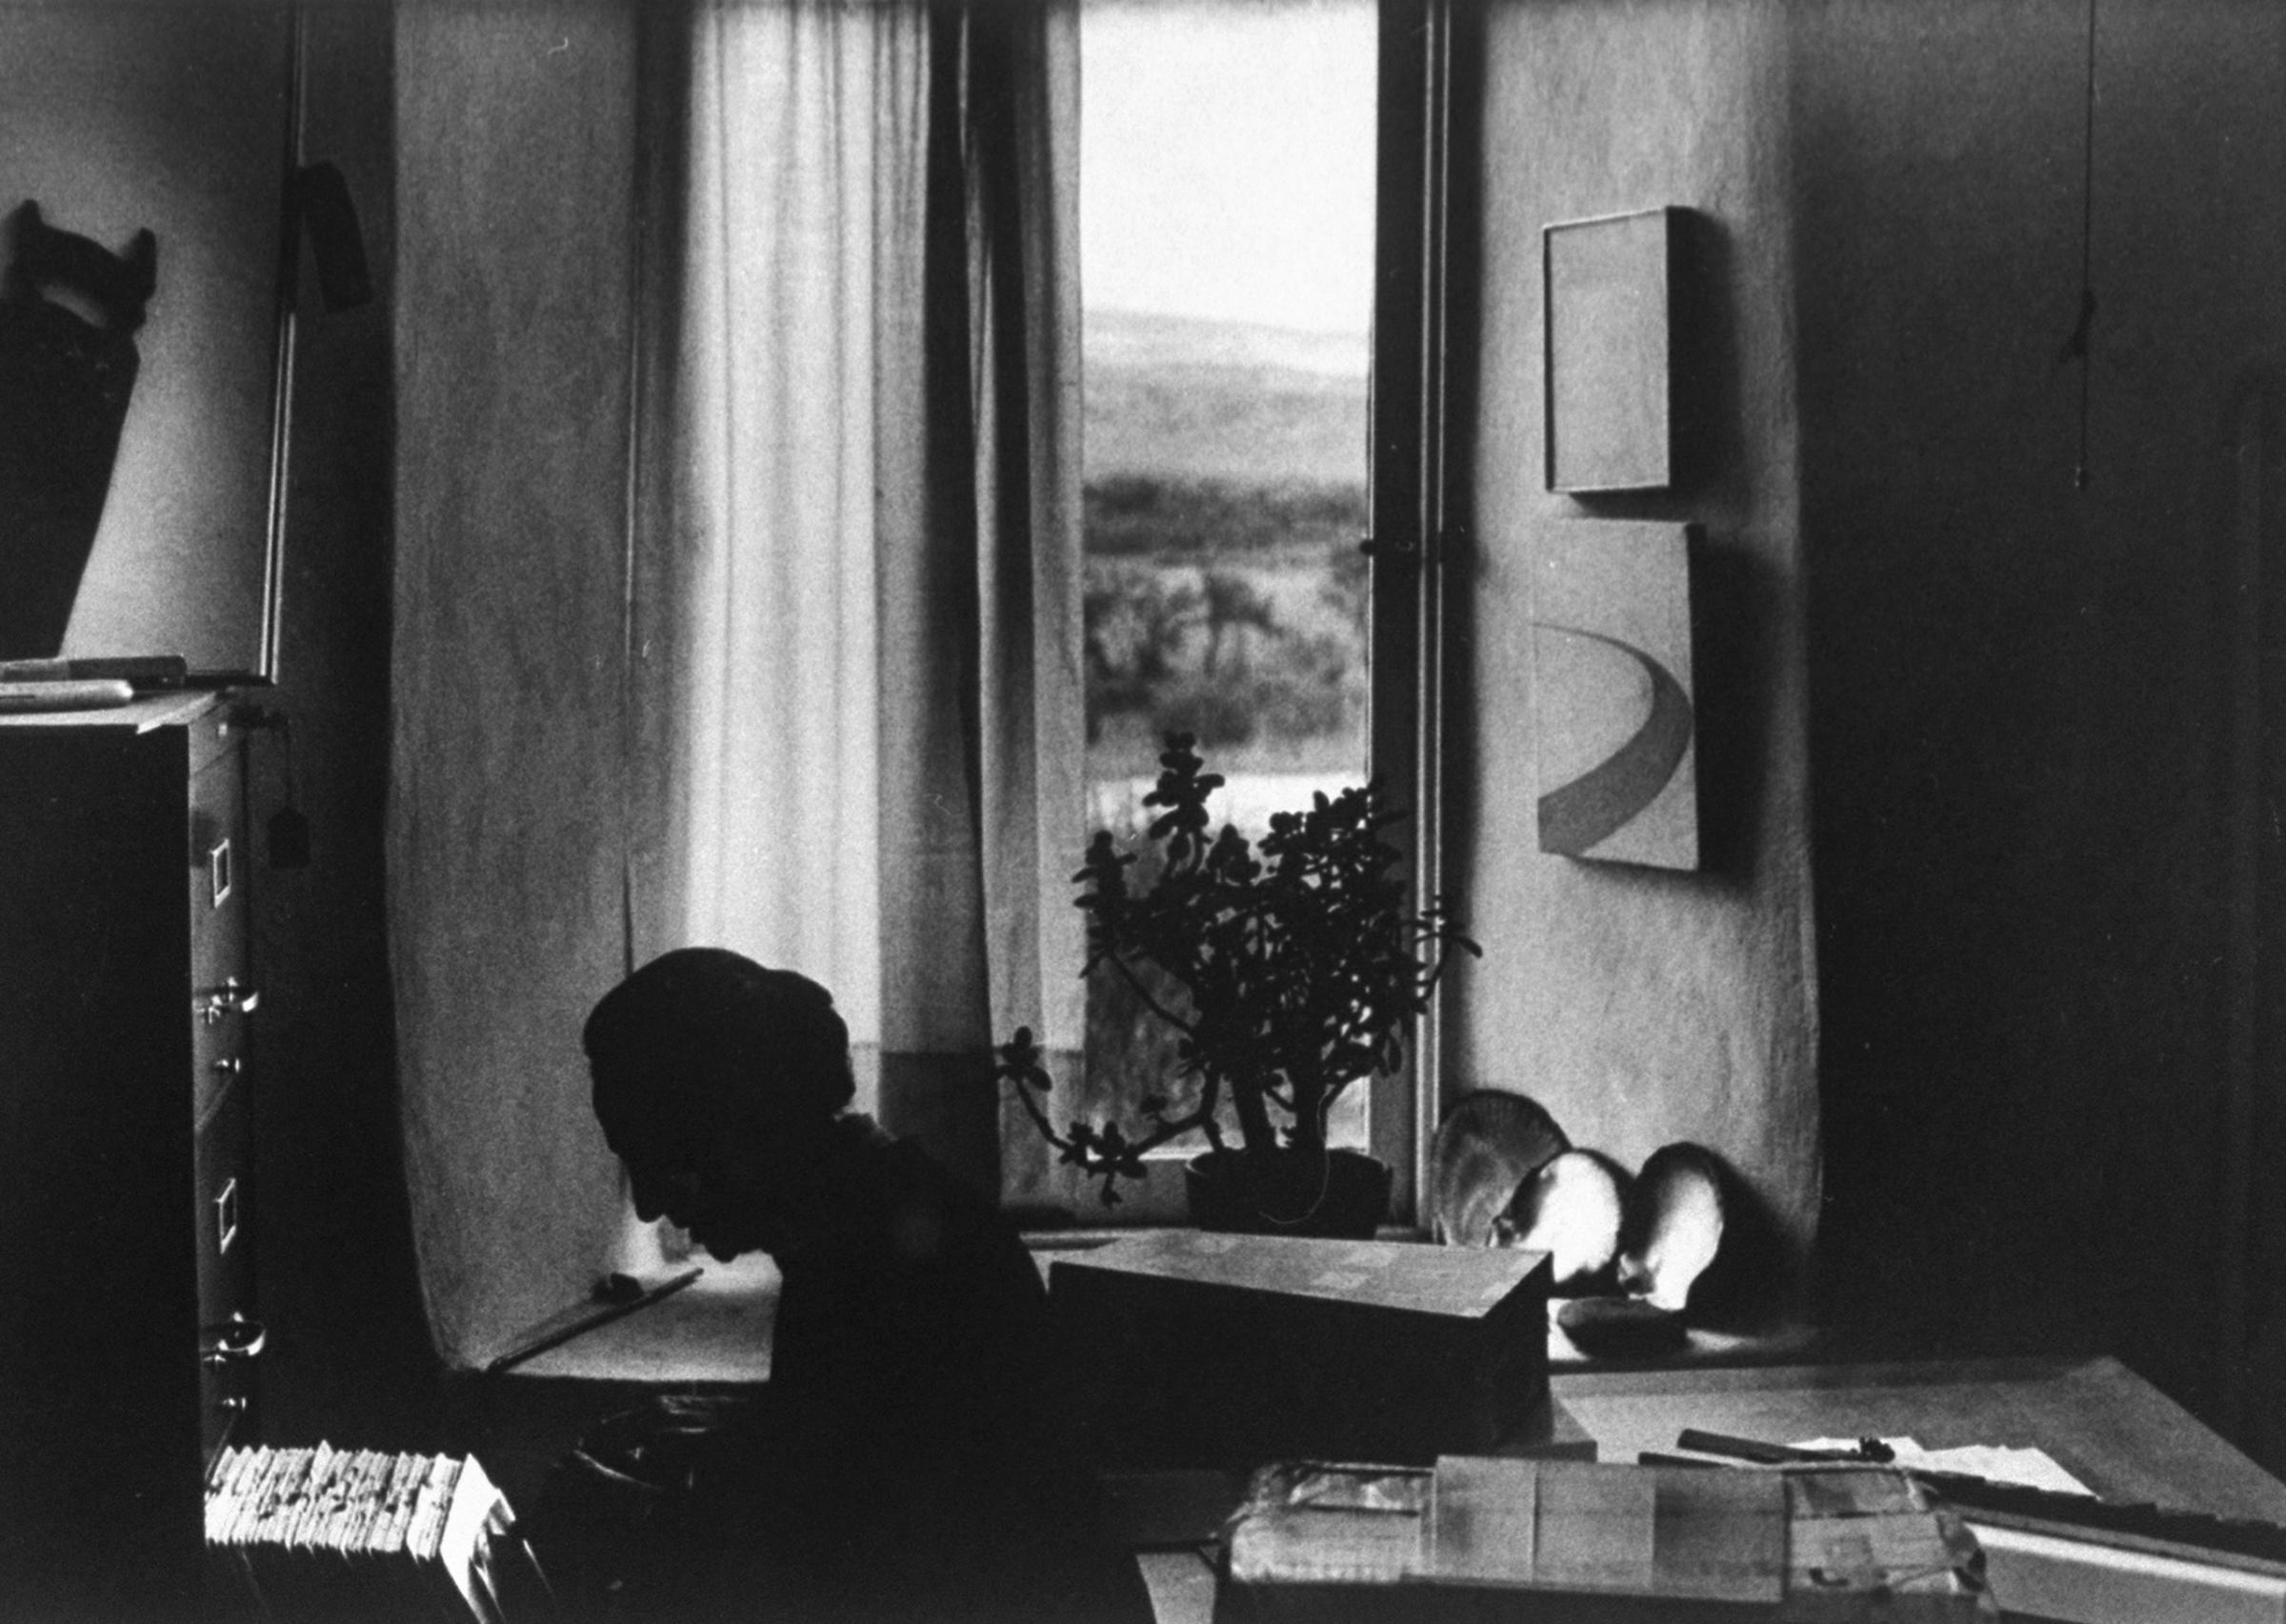 Artist Georgia O'Keeffe at her home in New Mexico, 1968.